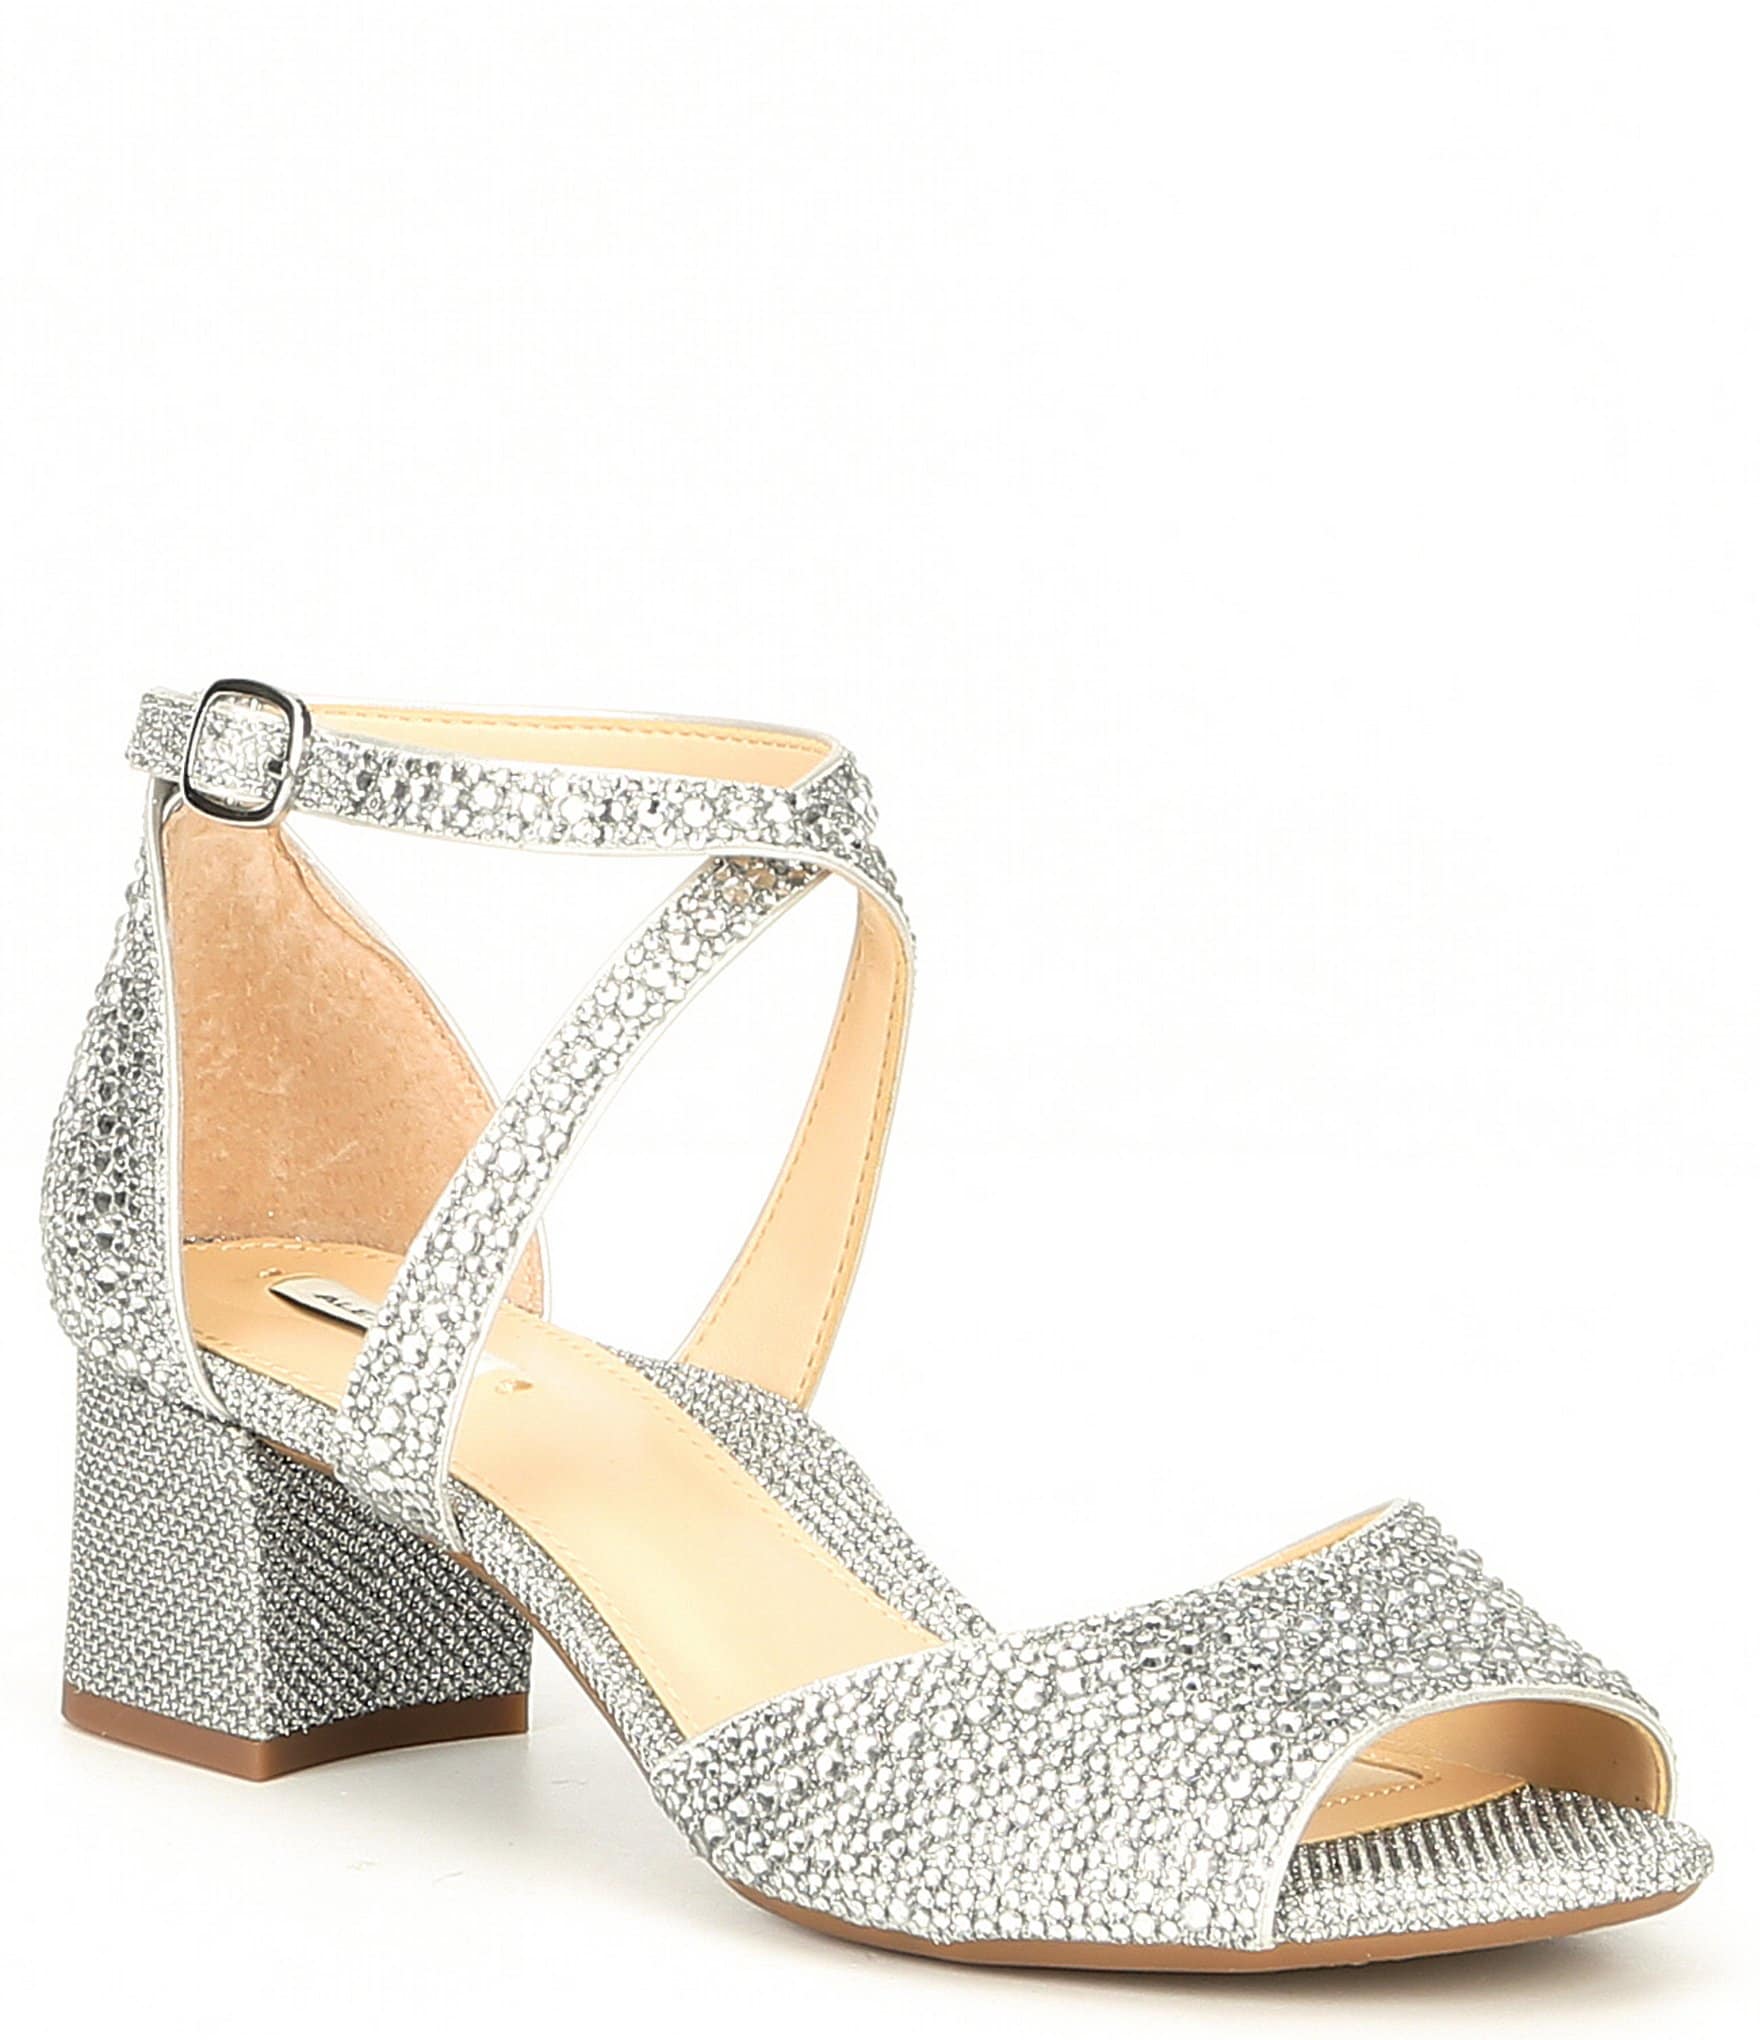 Ladies Cut Out Side Mid Heel Wedges Peep Toe Evening Shoes Sparkly Pumps S30354 